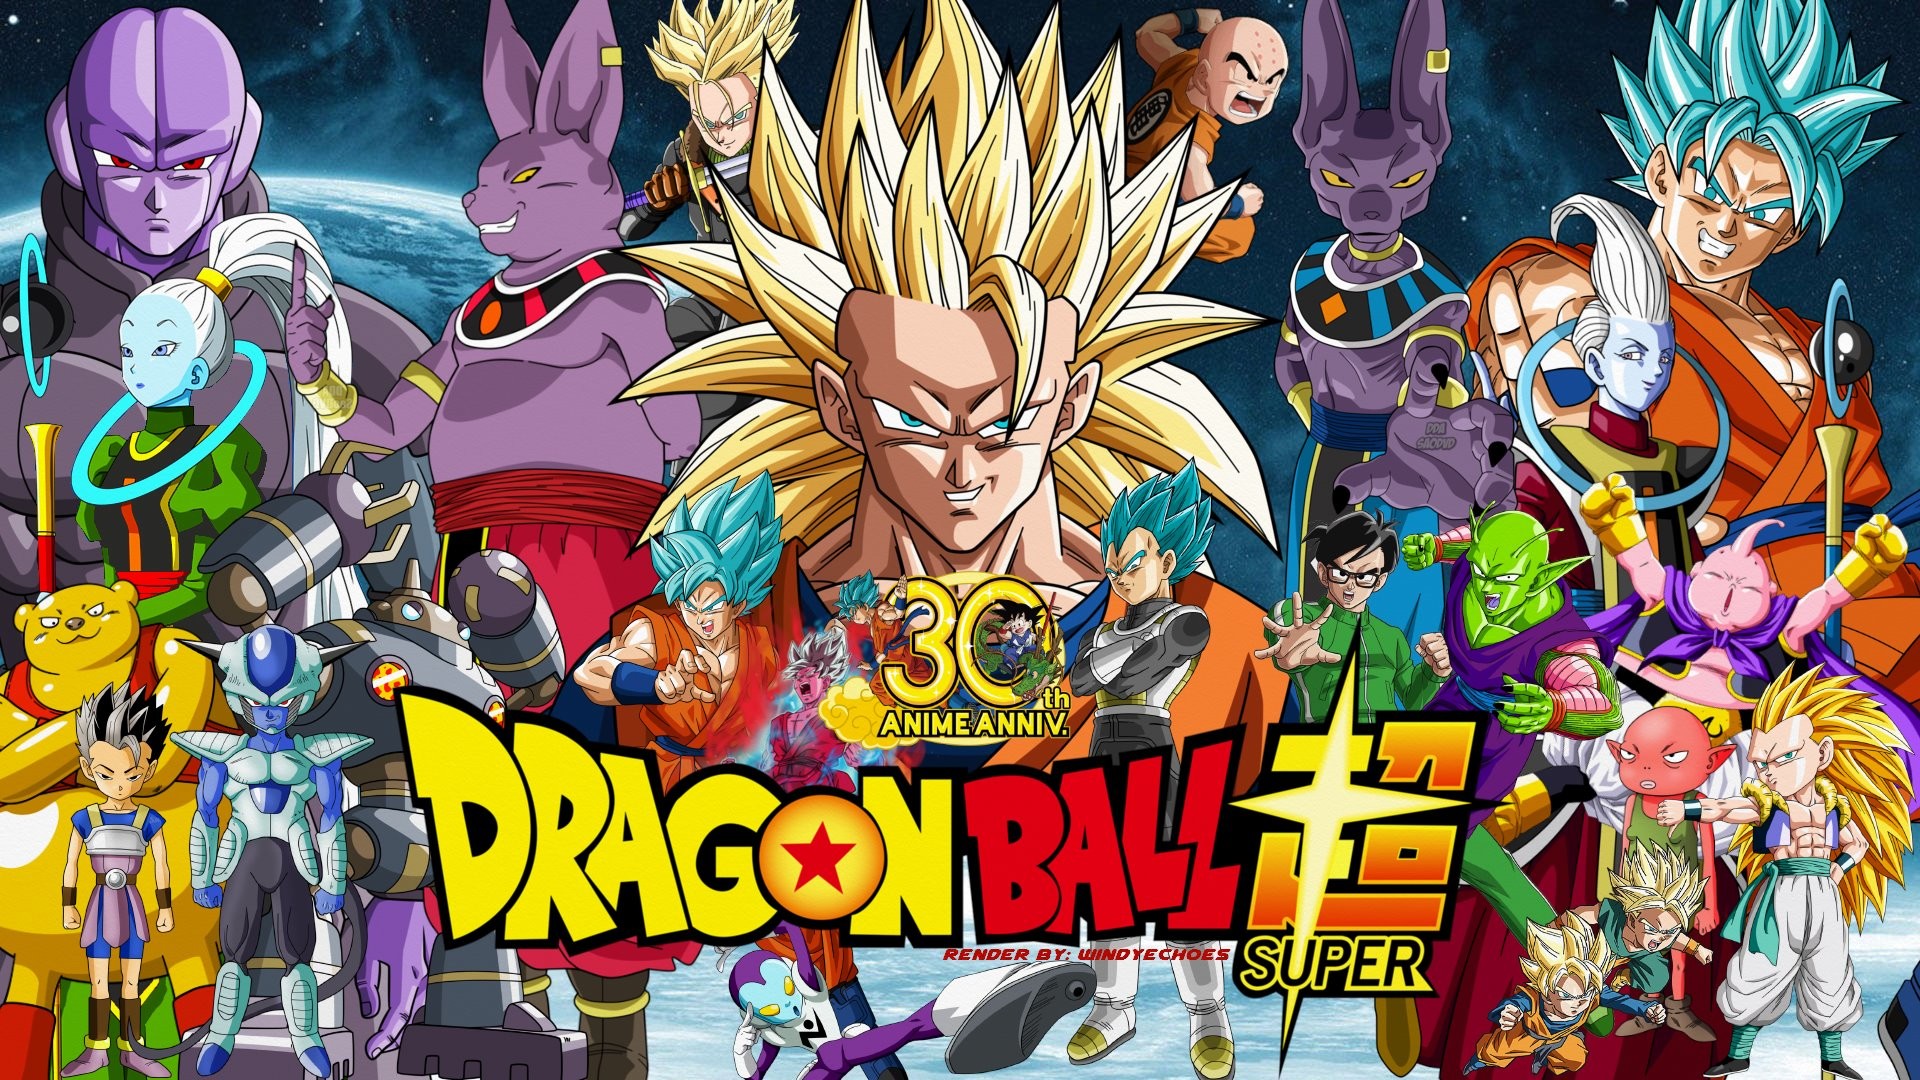 1920x1080 ... Dragon Ball Super 30th Anniversary Wallpaper # 1 by WindyEchoes